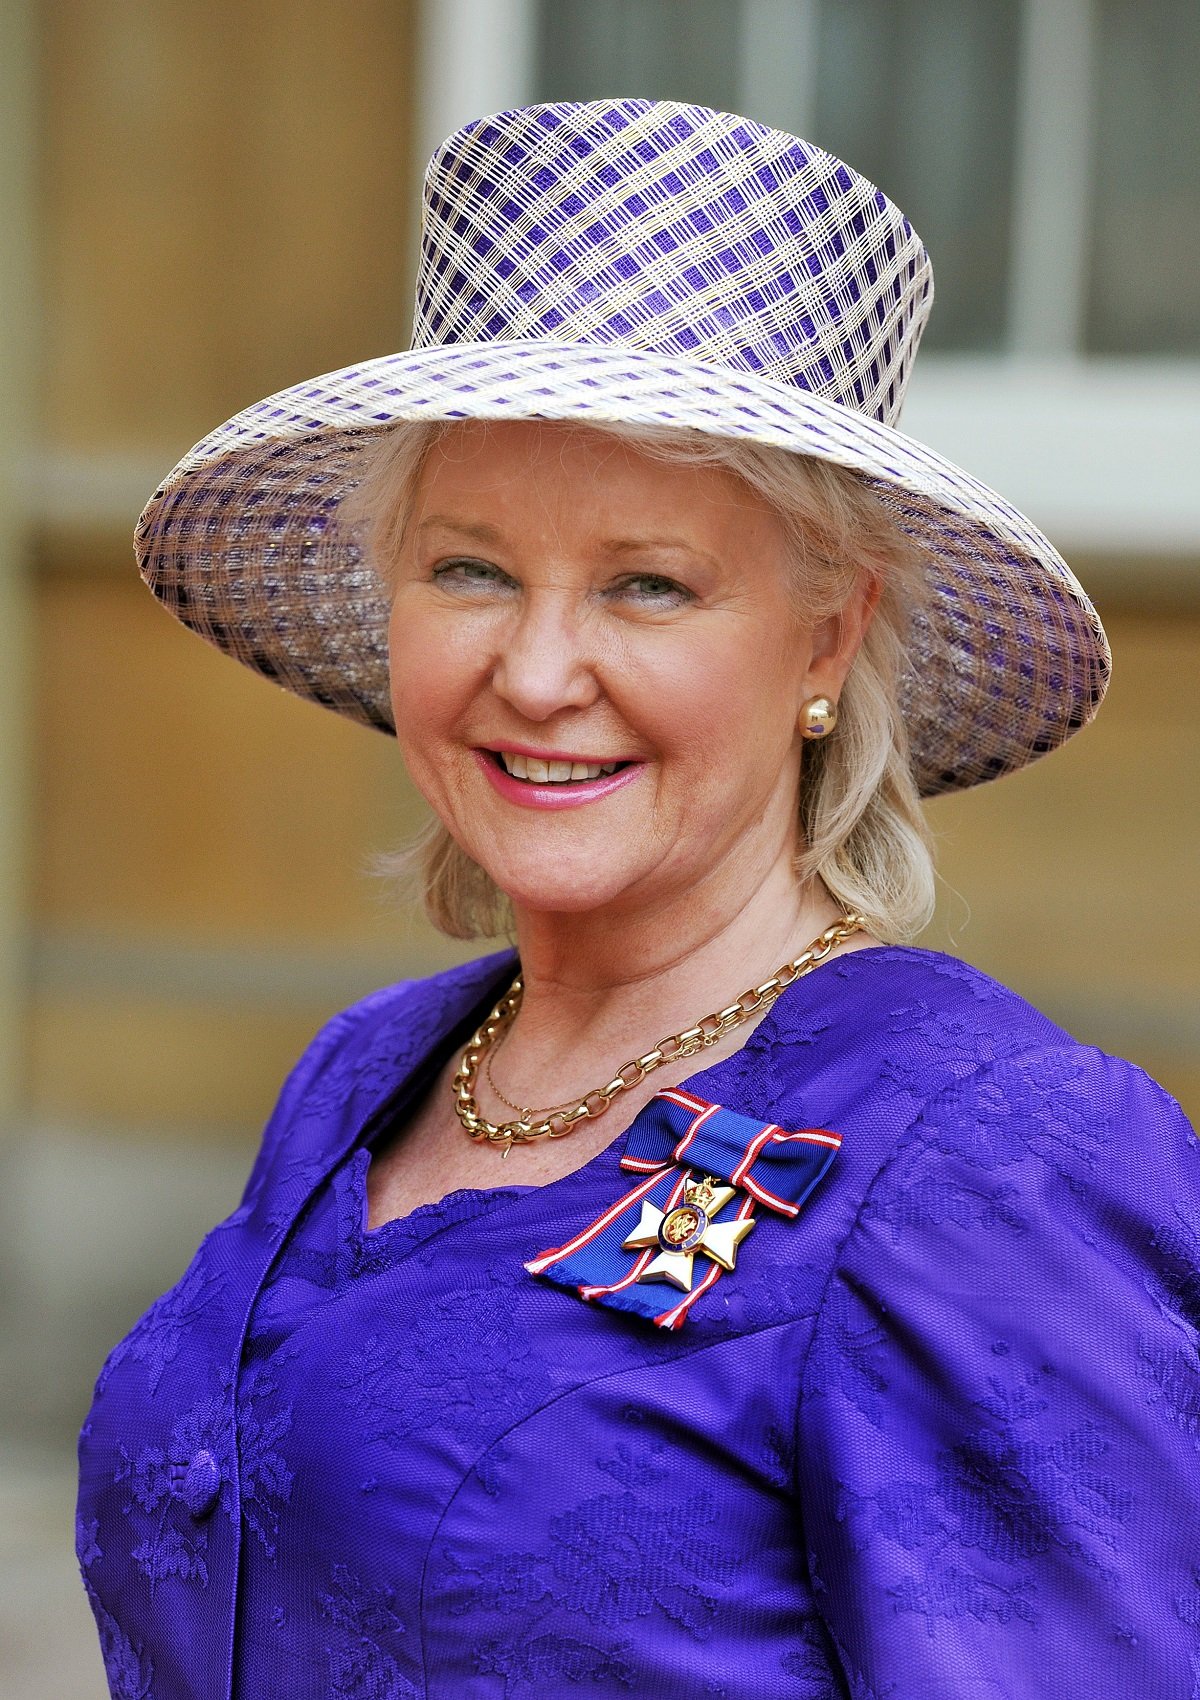 Angela Kelly, who was Queen Elizabeth II's personnel dresser, proudly wears her Royal Victorian Order medal